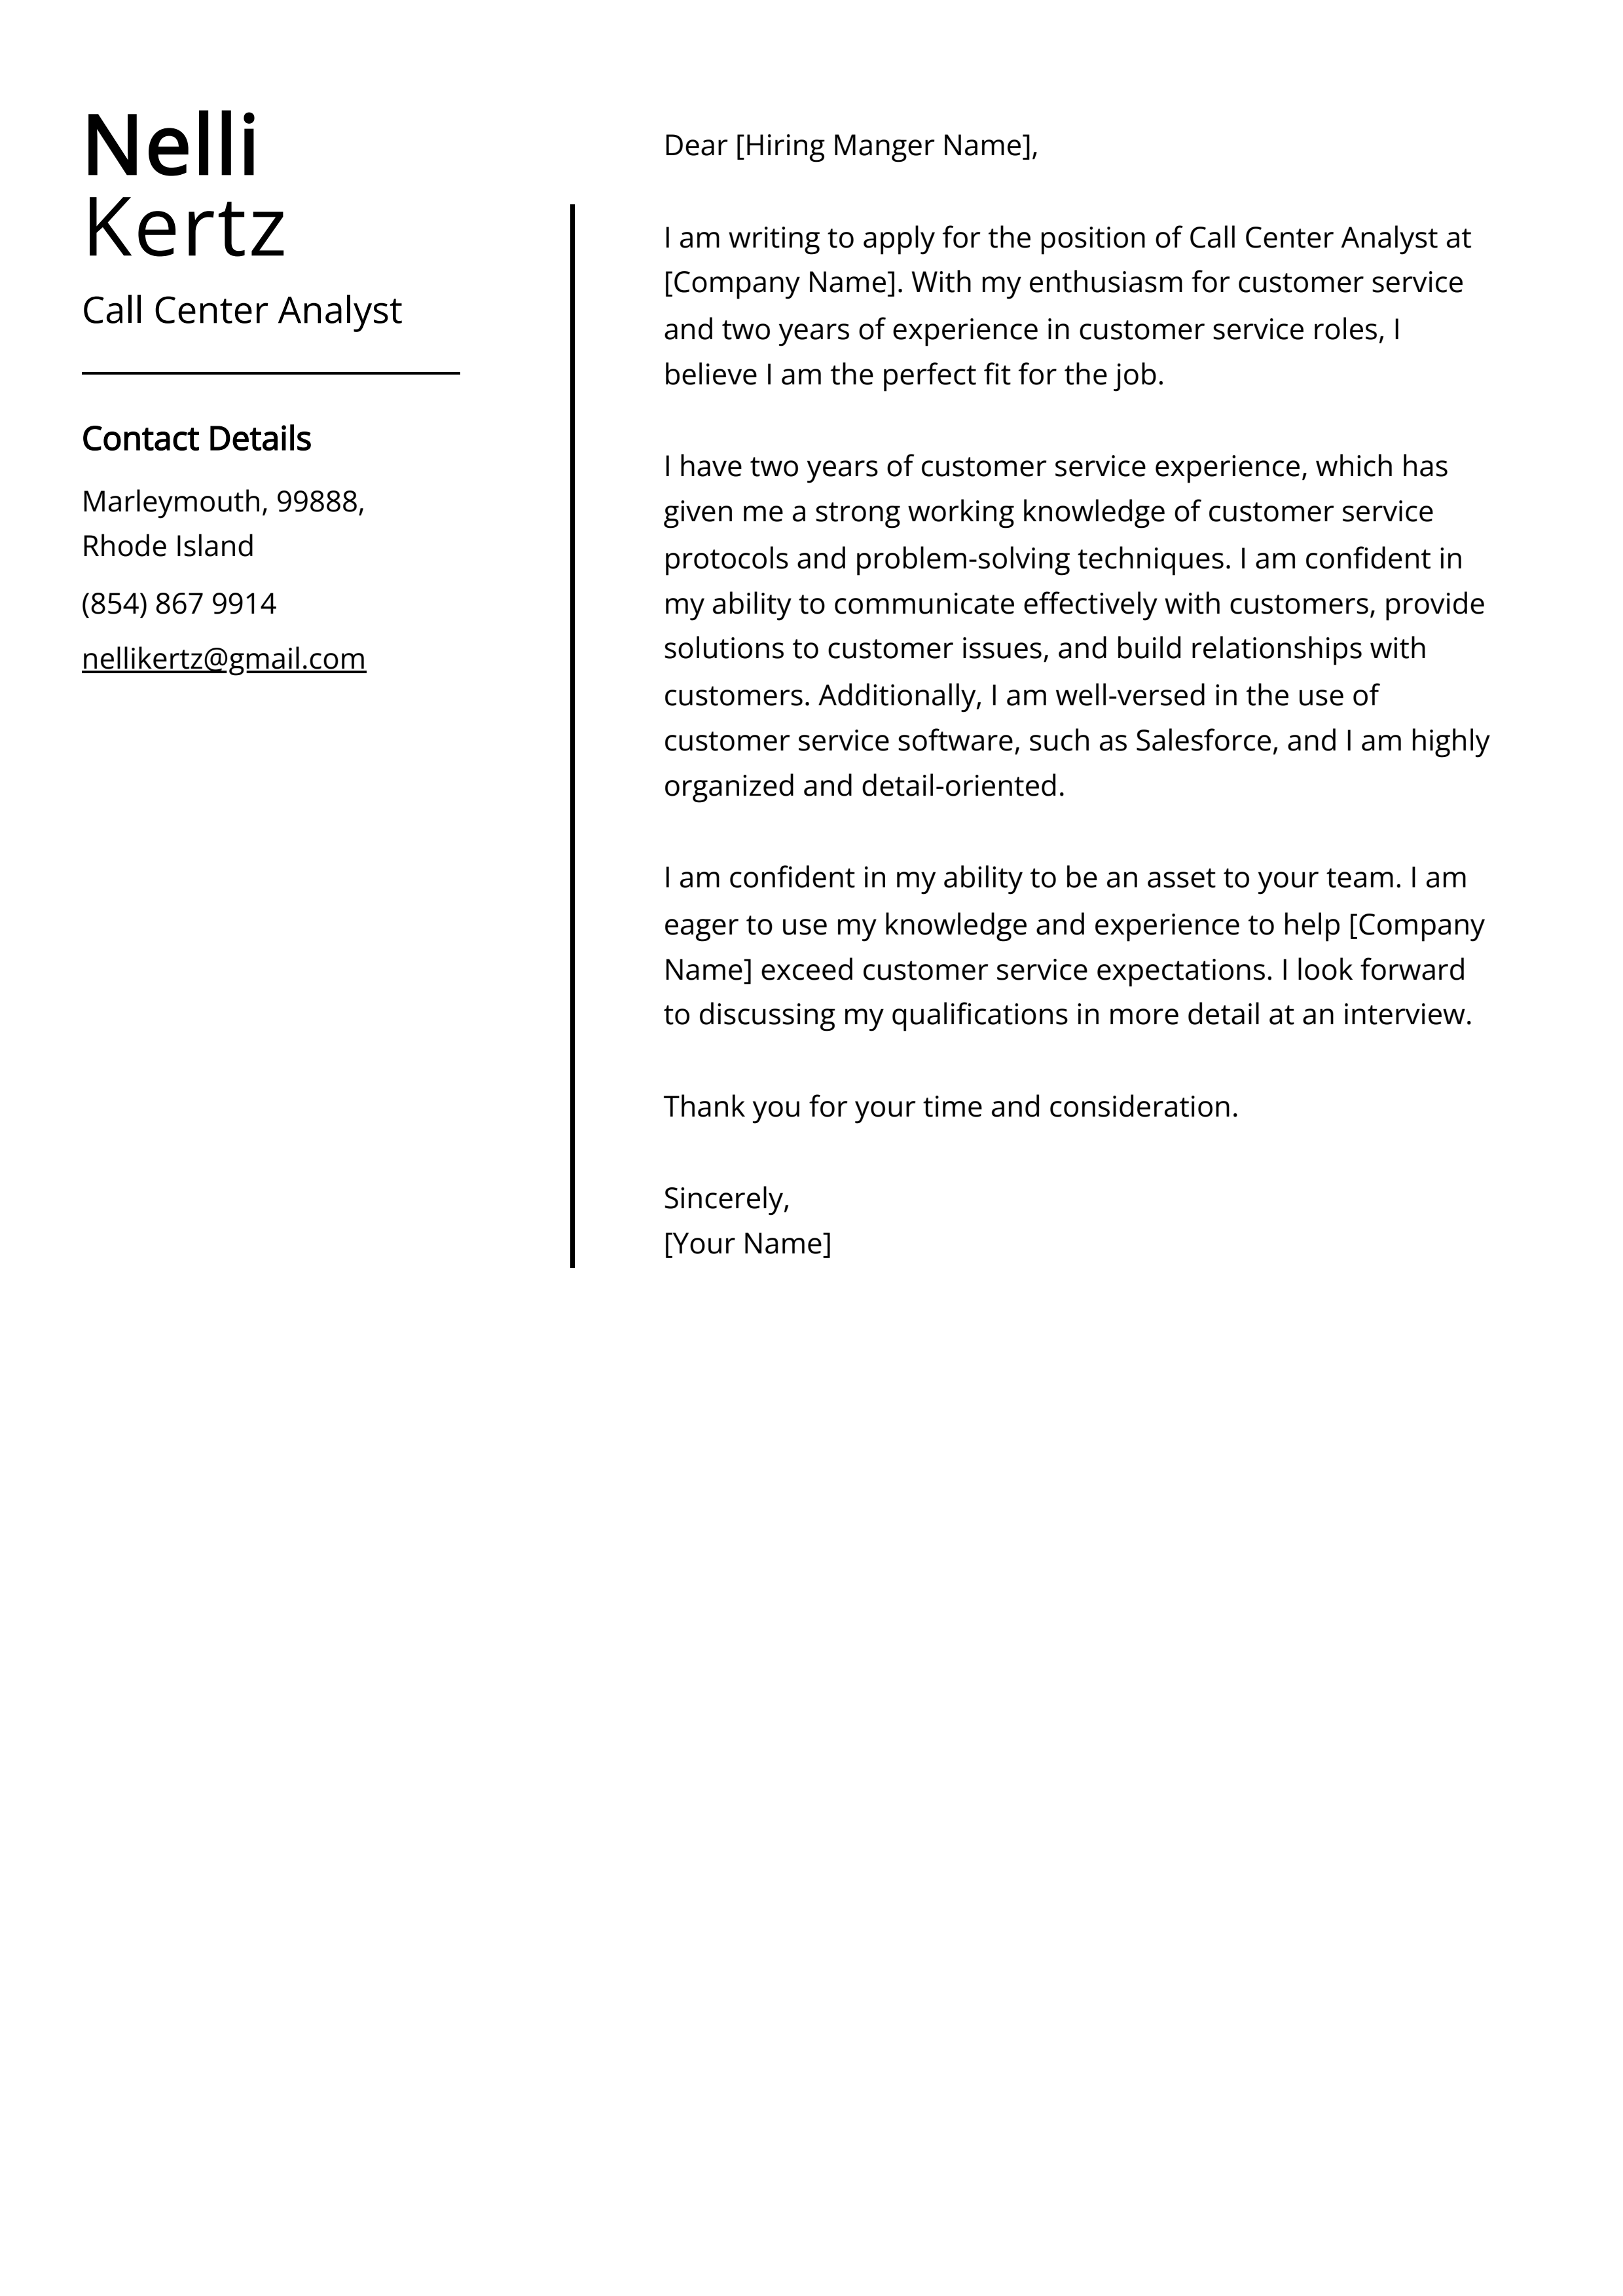 Call Center Analyst Cover Letter Example